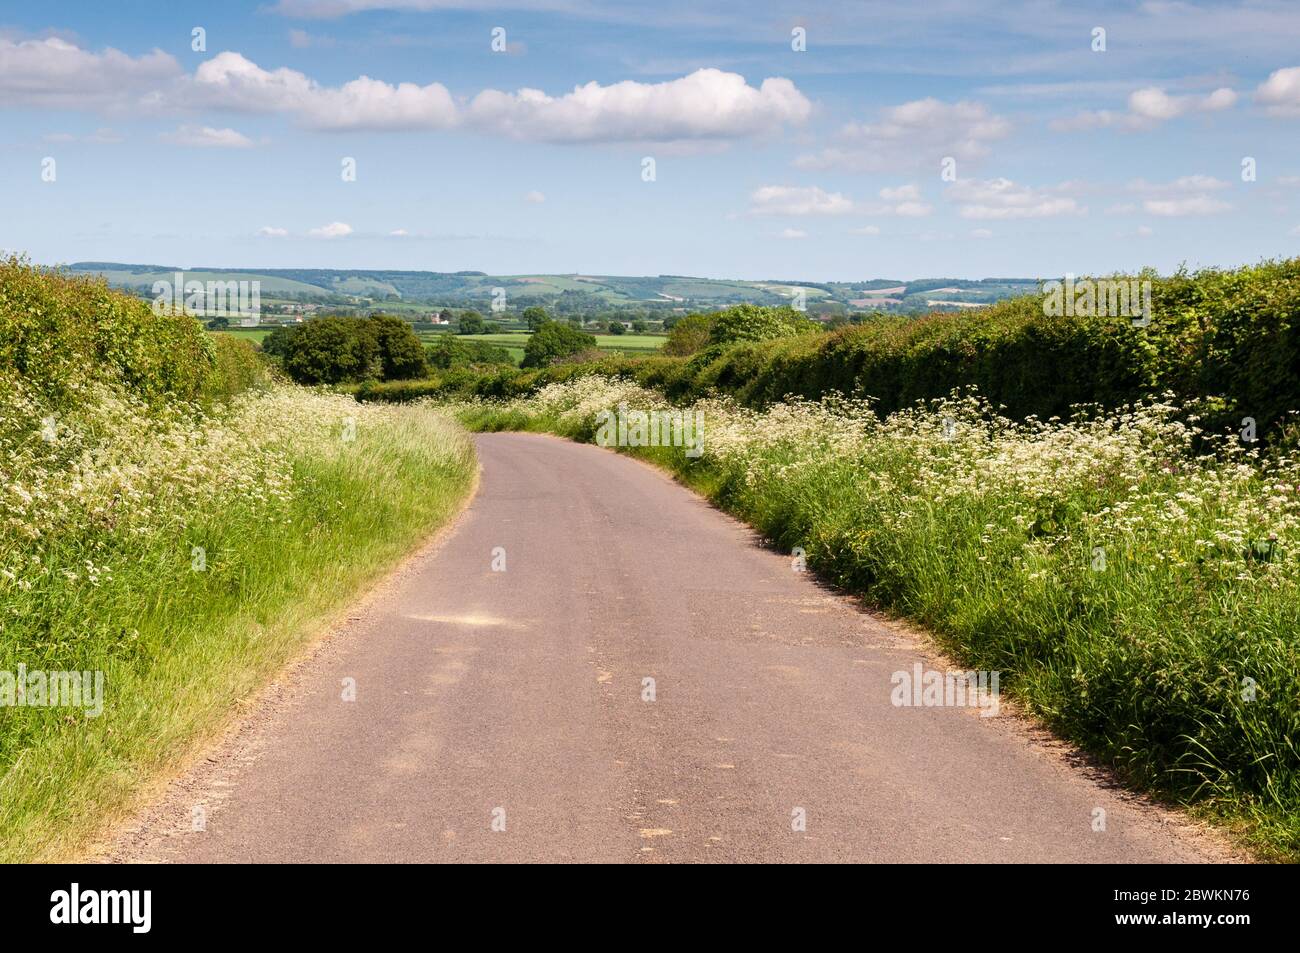 Wildflowers grow tall on the green verges of a country lane in Dorset's agricultural Blackmore Vale. Stock Photo